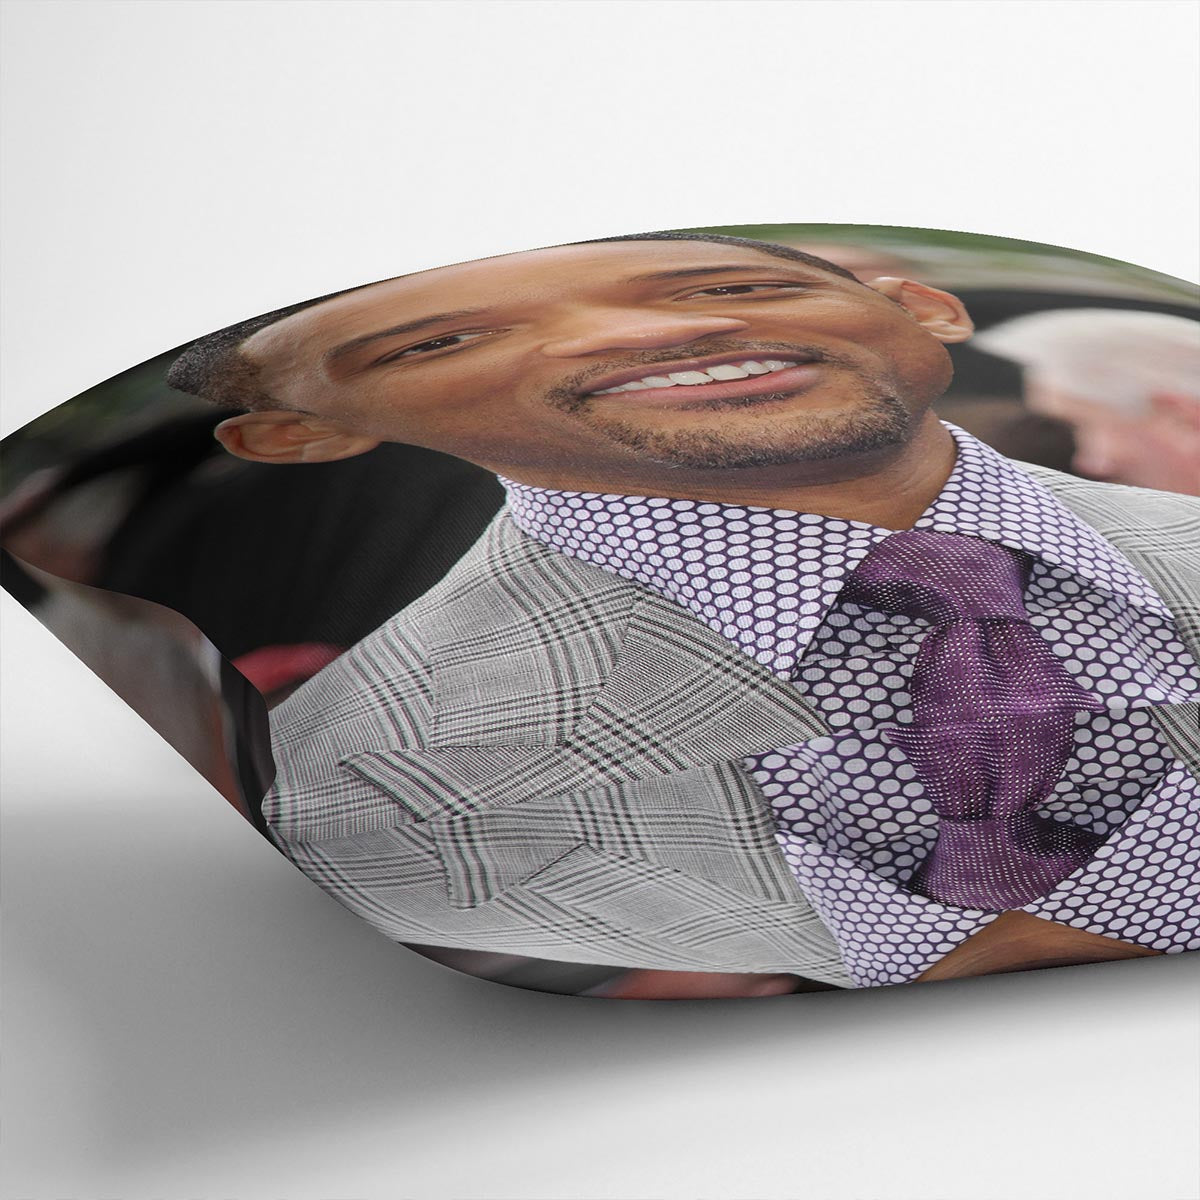 Will Smith In Suit Cushion